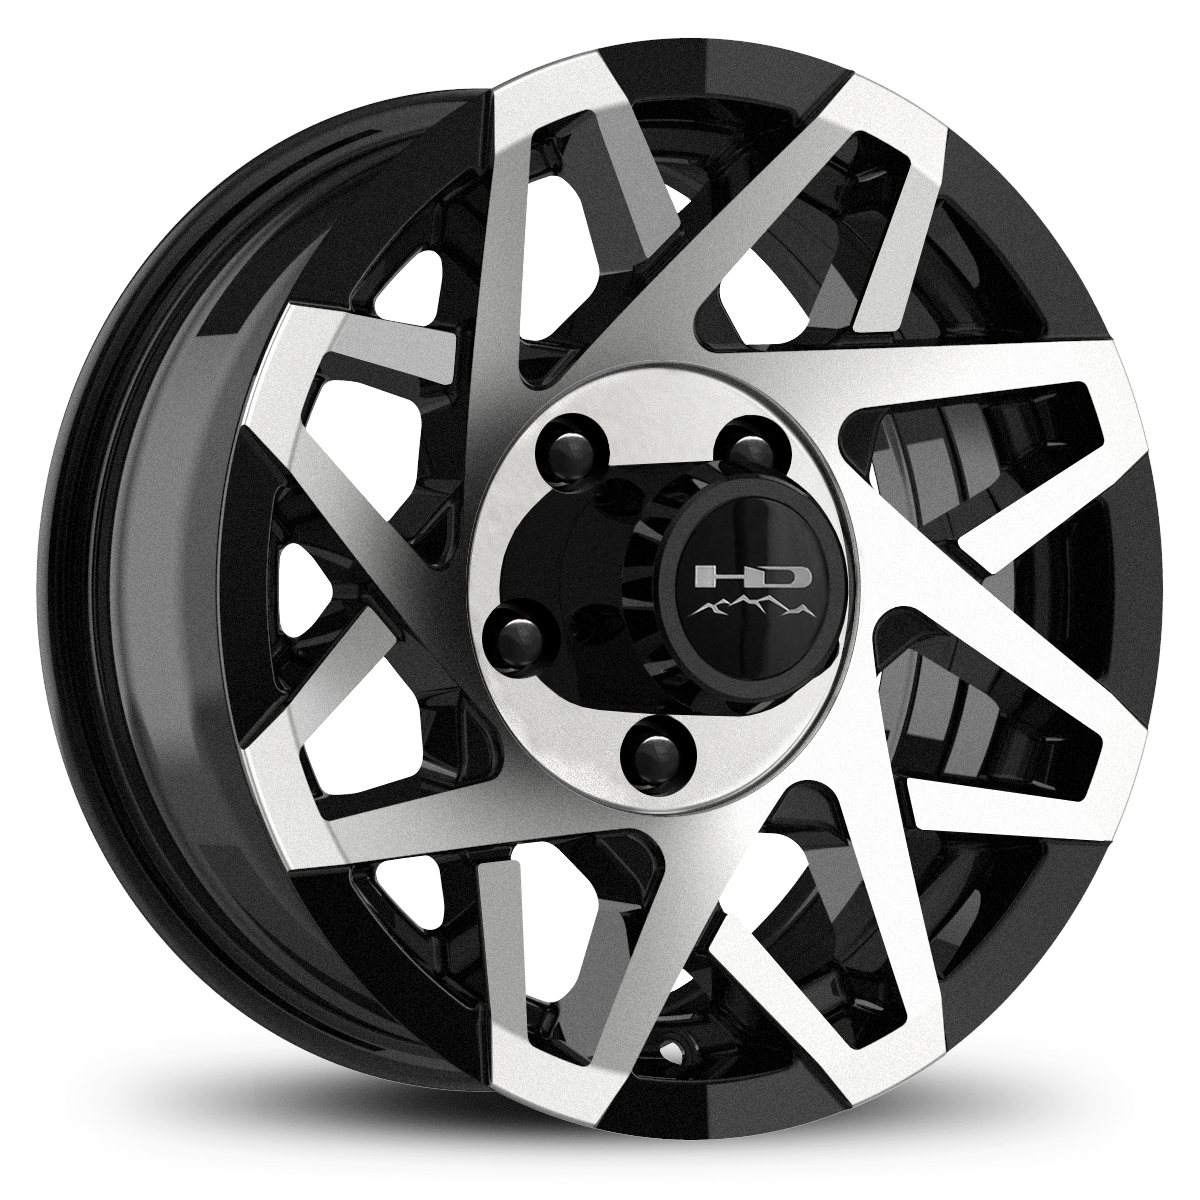 HD Off-Road Canyon Custom Trailer Wheel Rims in 15x6.0  15x6 Gloss Black Machined Face with Center Cap & Logo fits 5x4.50 / 5x114.3 Axle Boat, Car, RV, Travel, Concession, Horse, Utility, Lawn & Garden, & Landscaping.